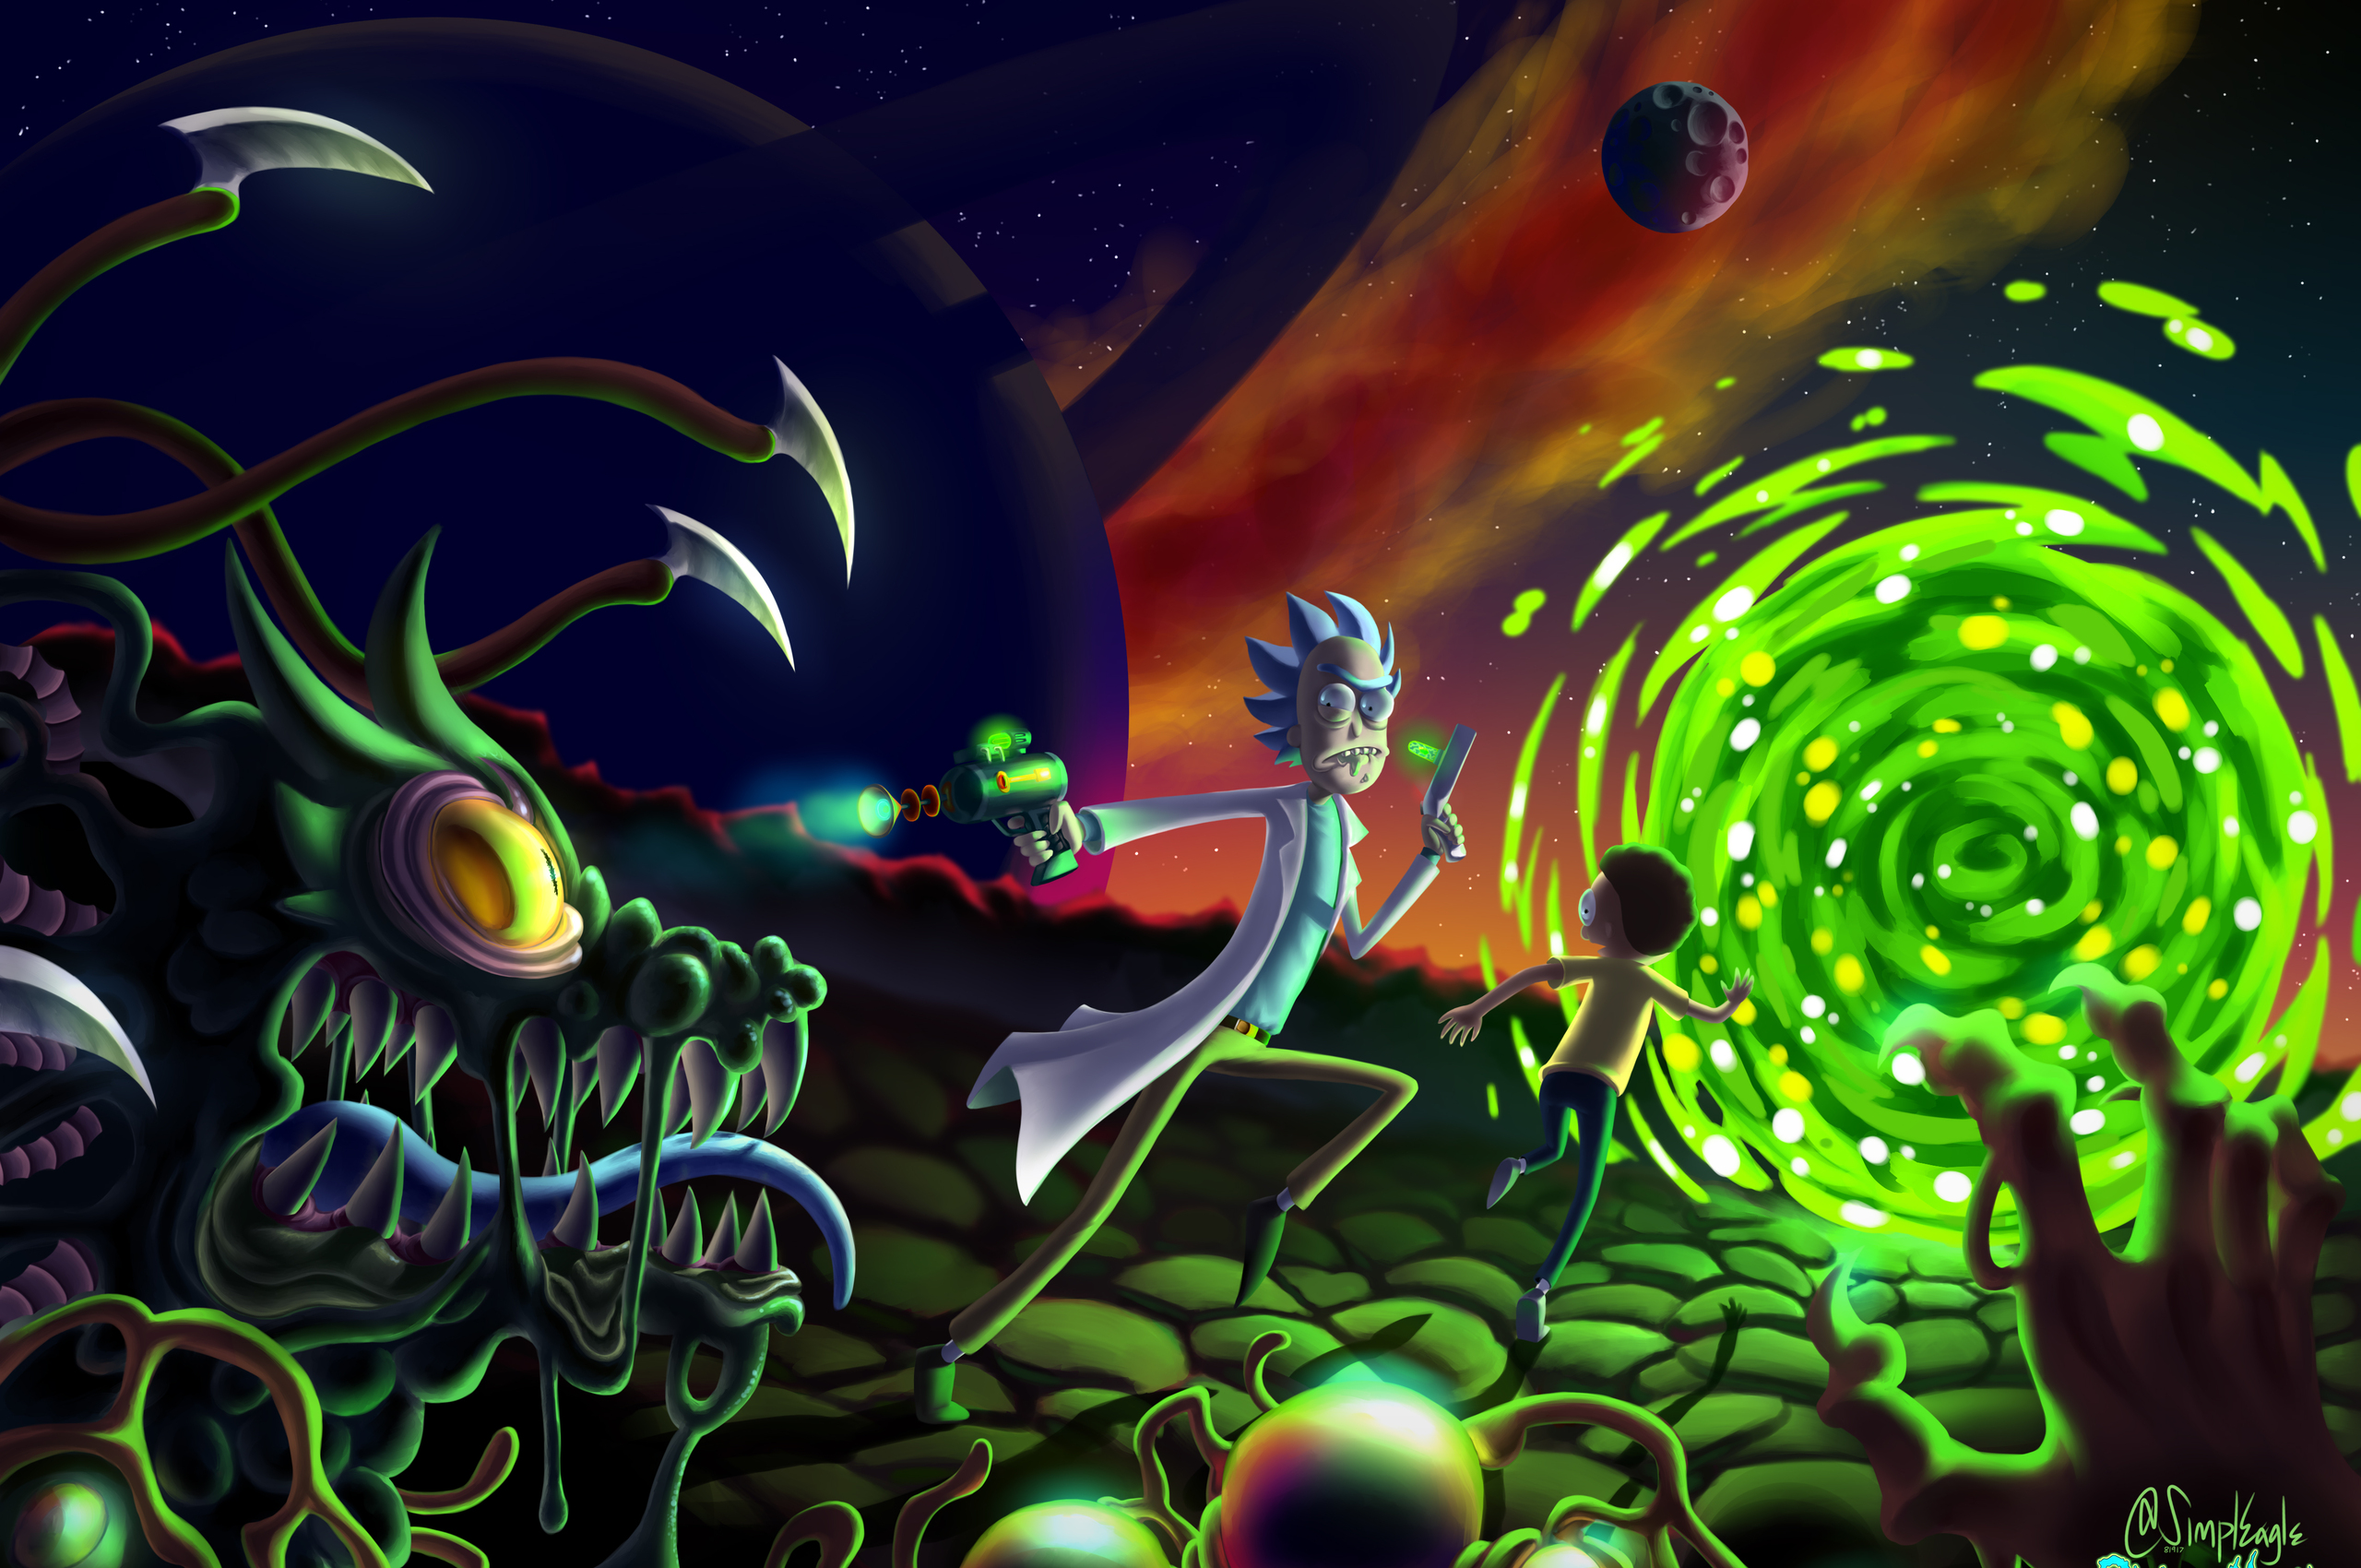 Rick And Morty 5k Fan Art In 2560x1700 Resolution. rick-and-morty-5k-...